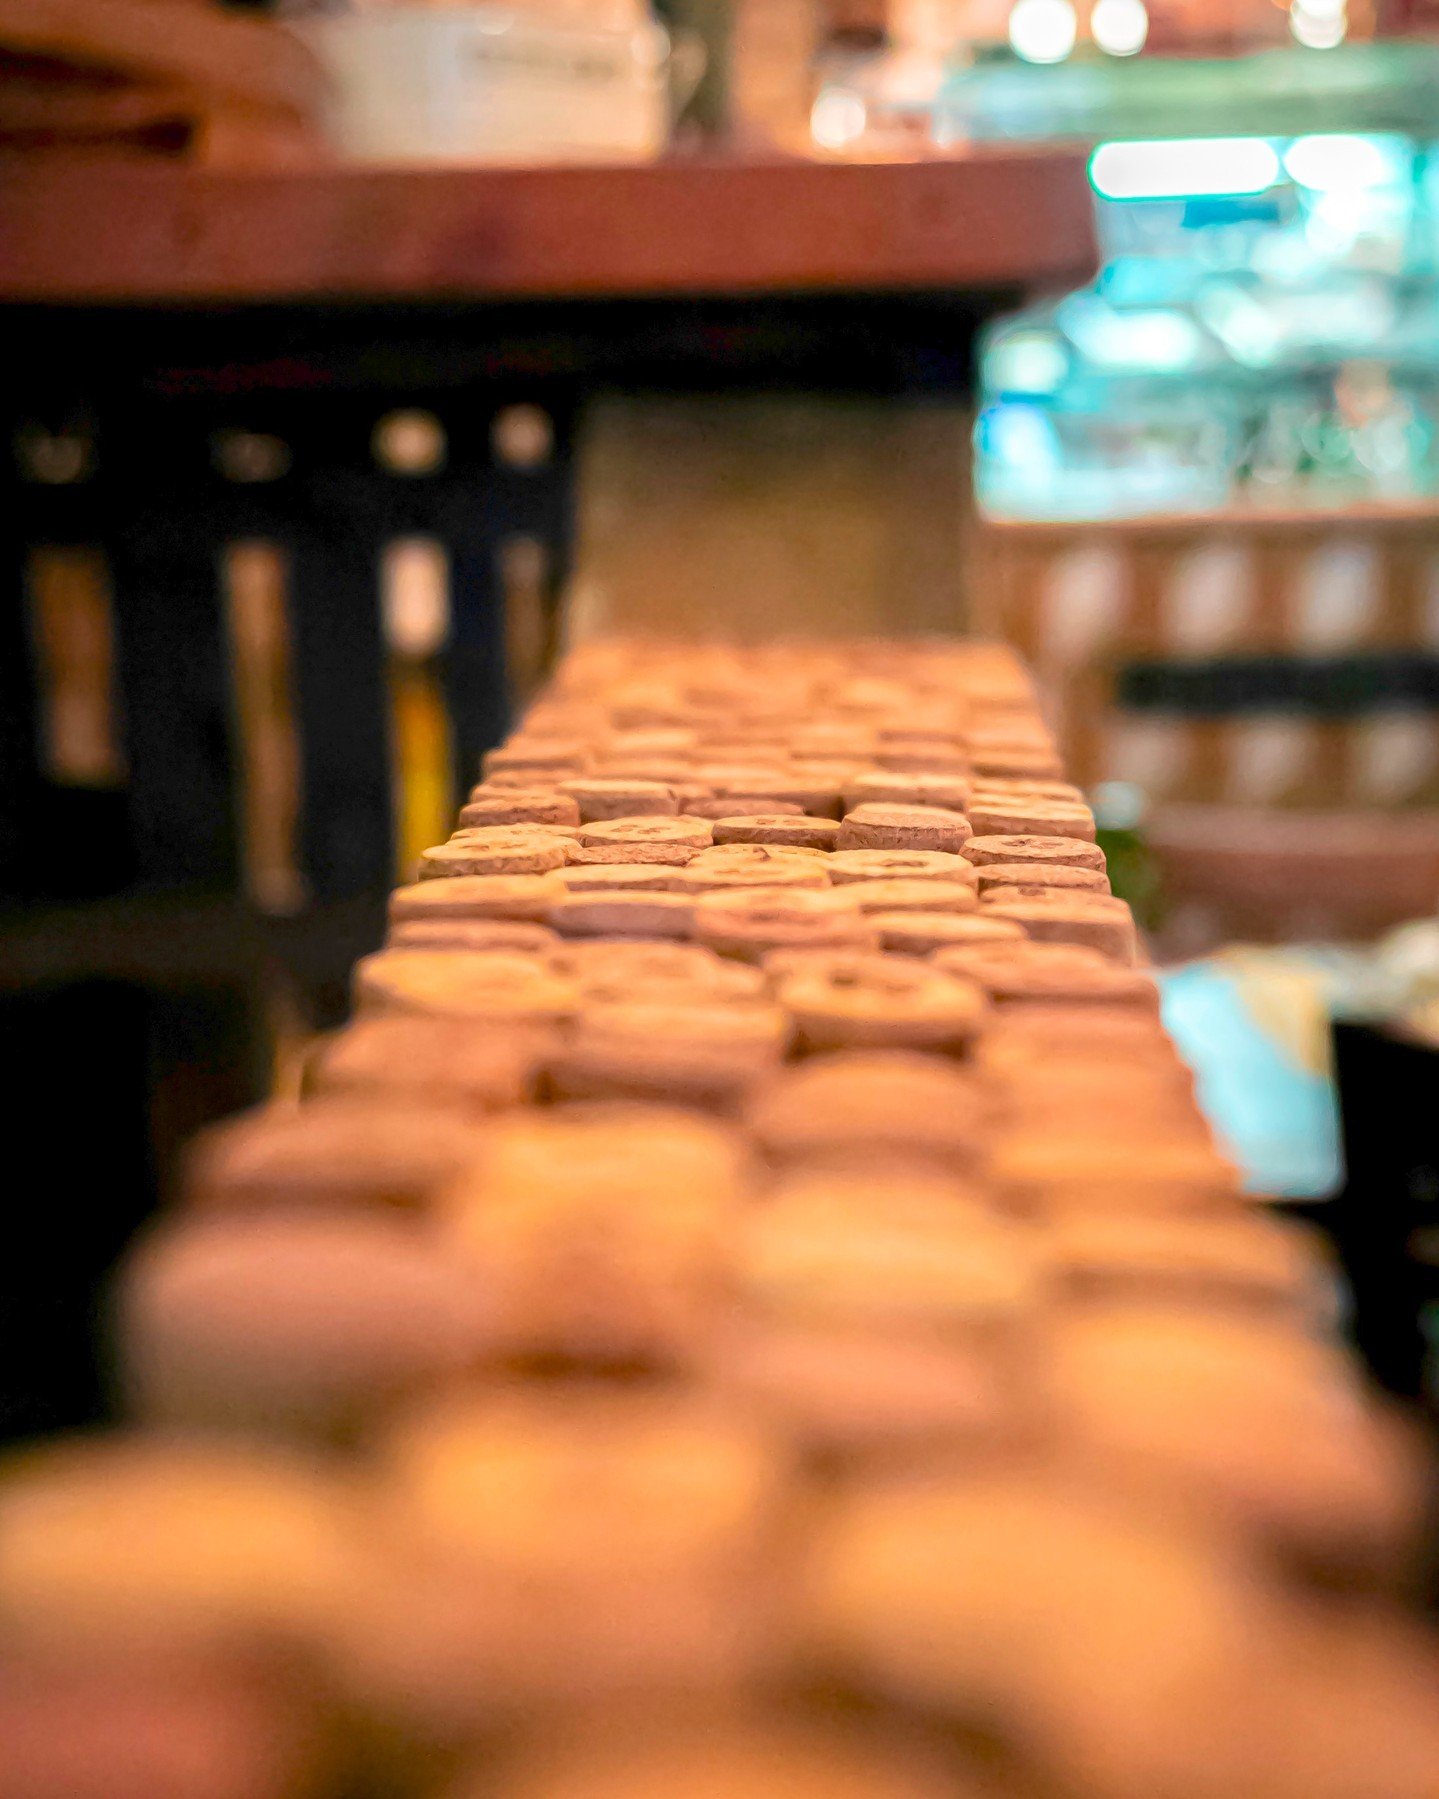 This wonderful line of corks you can find at the entrance of our restaurant, represents about 80 bottles of wine! 🍷

That's 
-320 glasses
-512 stories told
-632 deep laughs
-220 hugs
-458 snort-laughs,
-700 'cin cin',
-573 purple smiles in pictures
